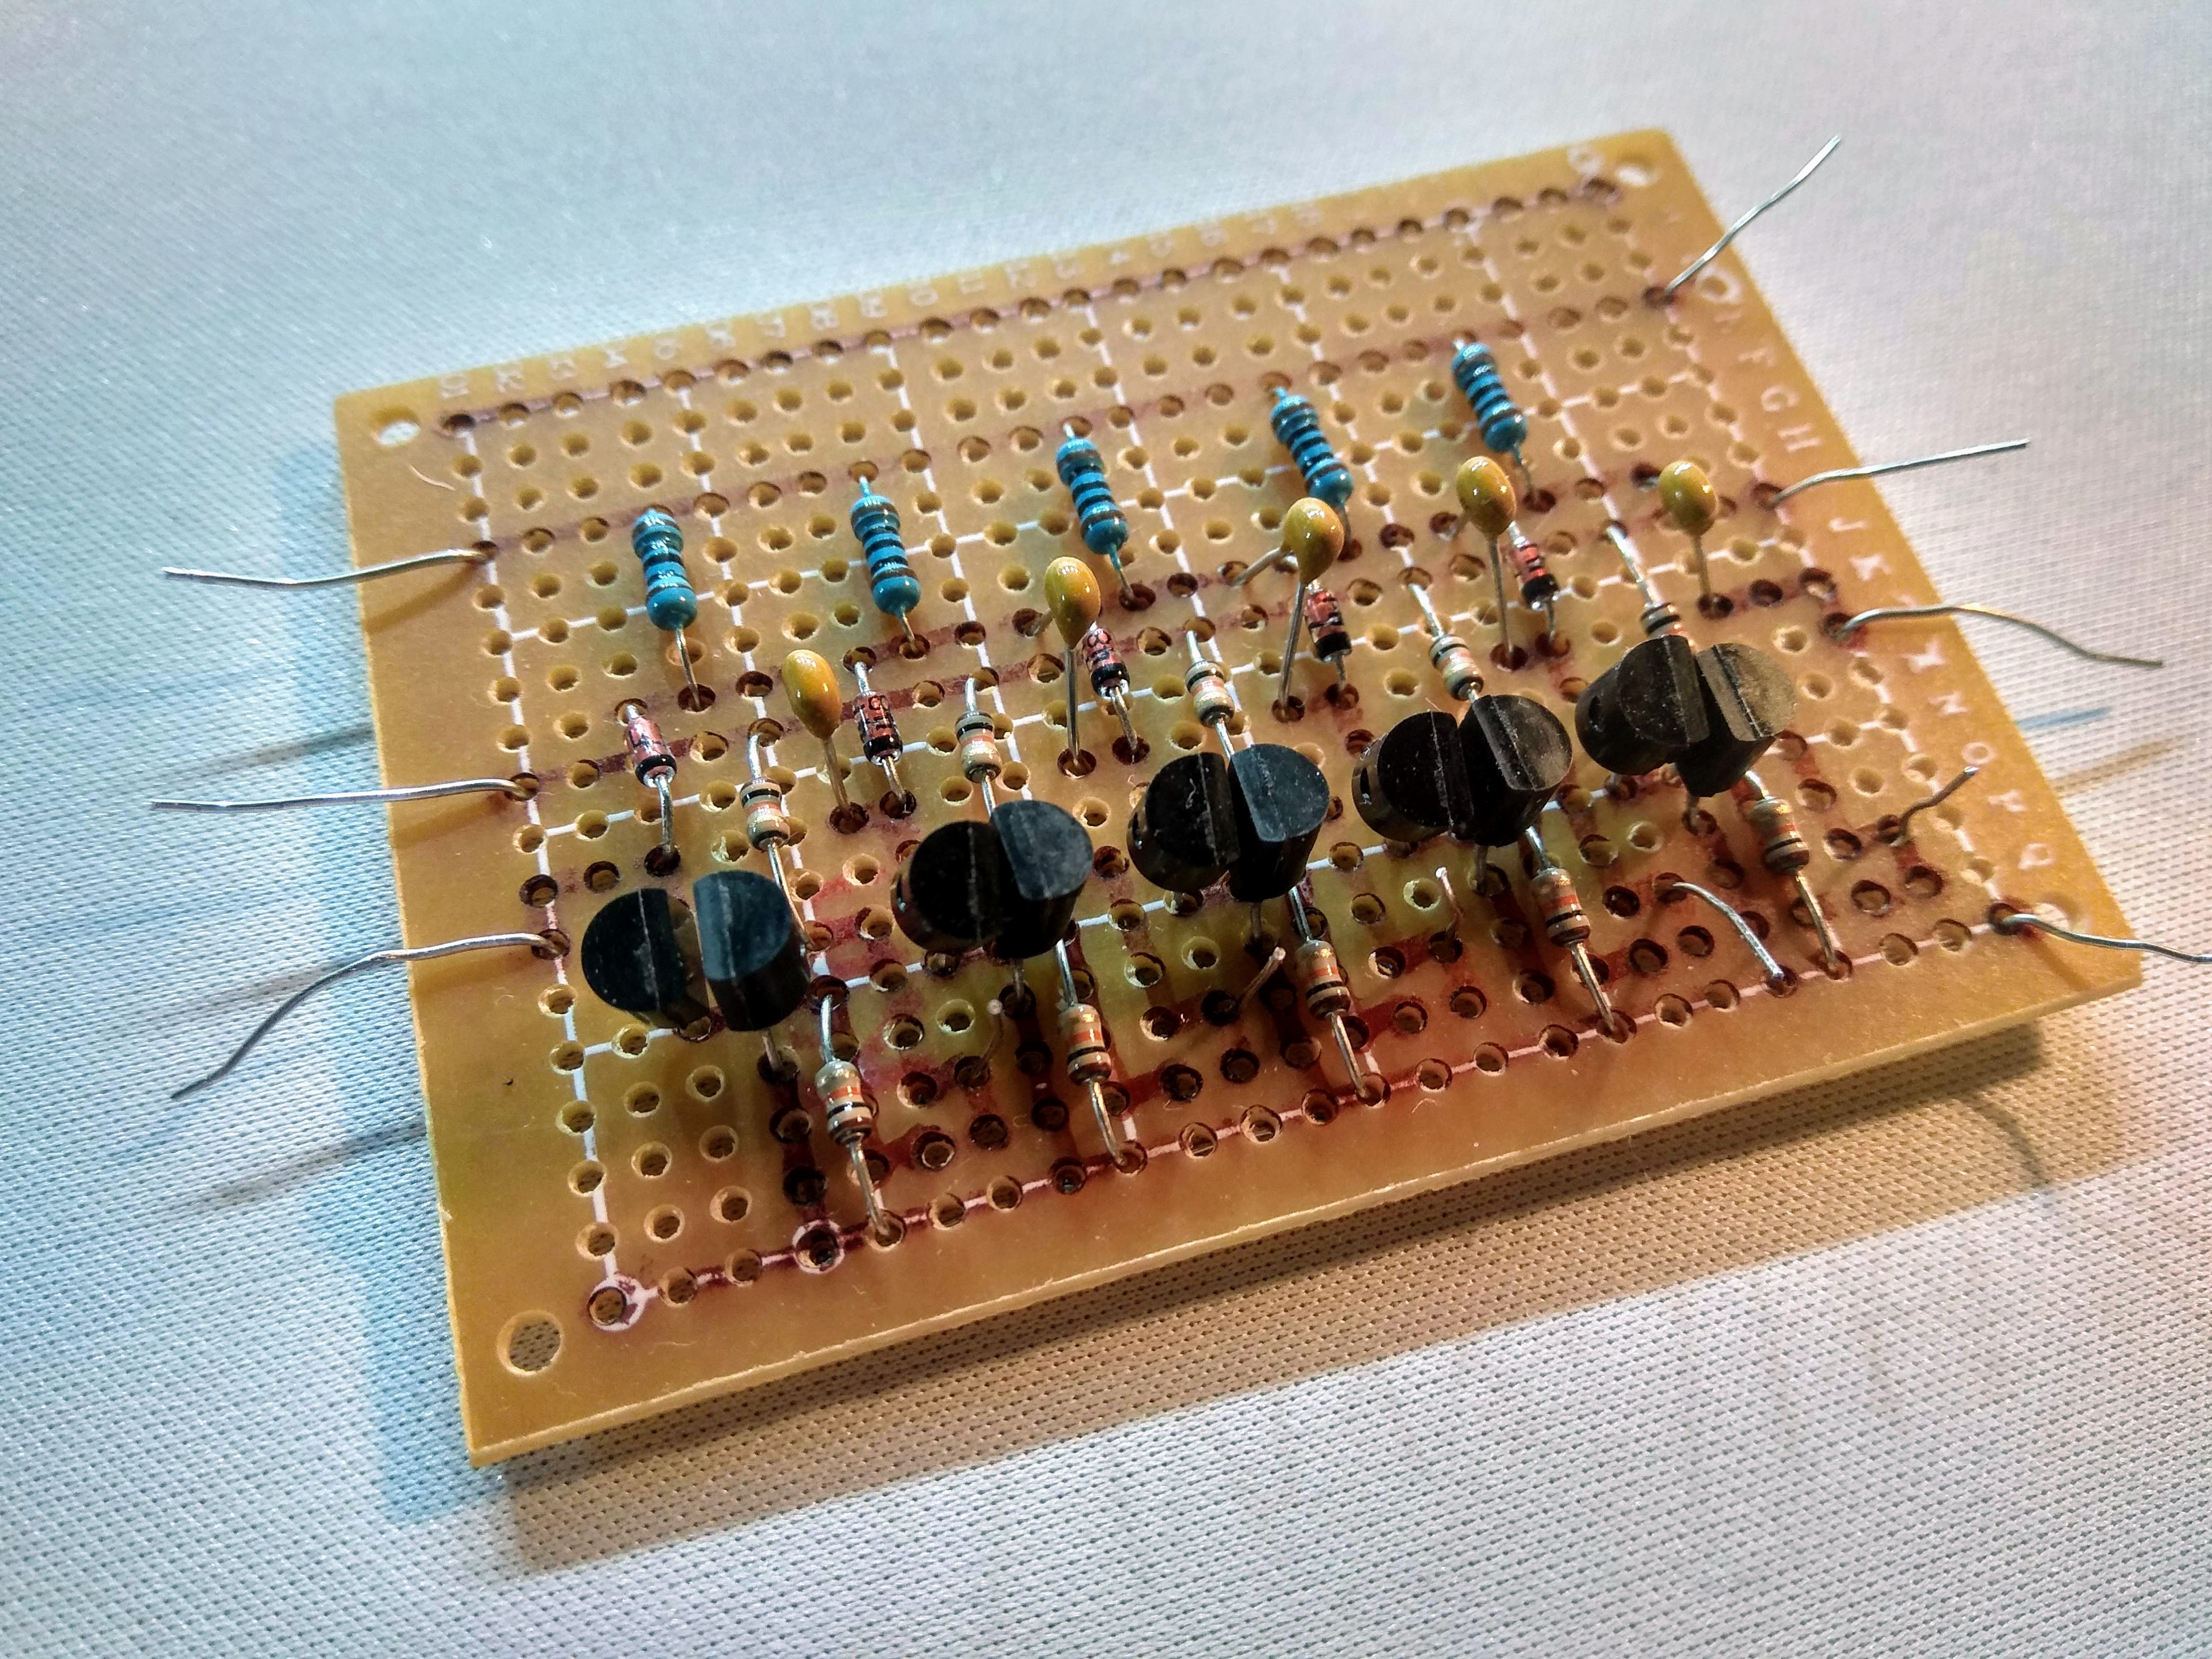 The 5 stage ring counter PCB